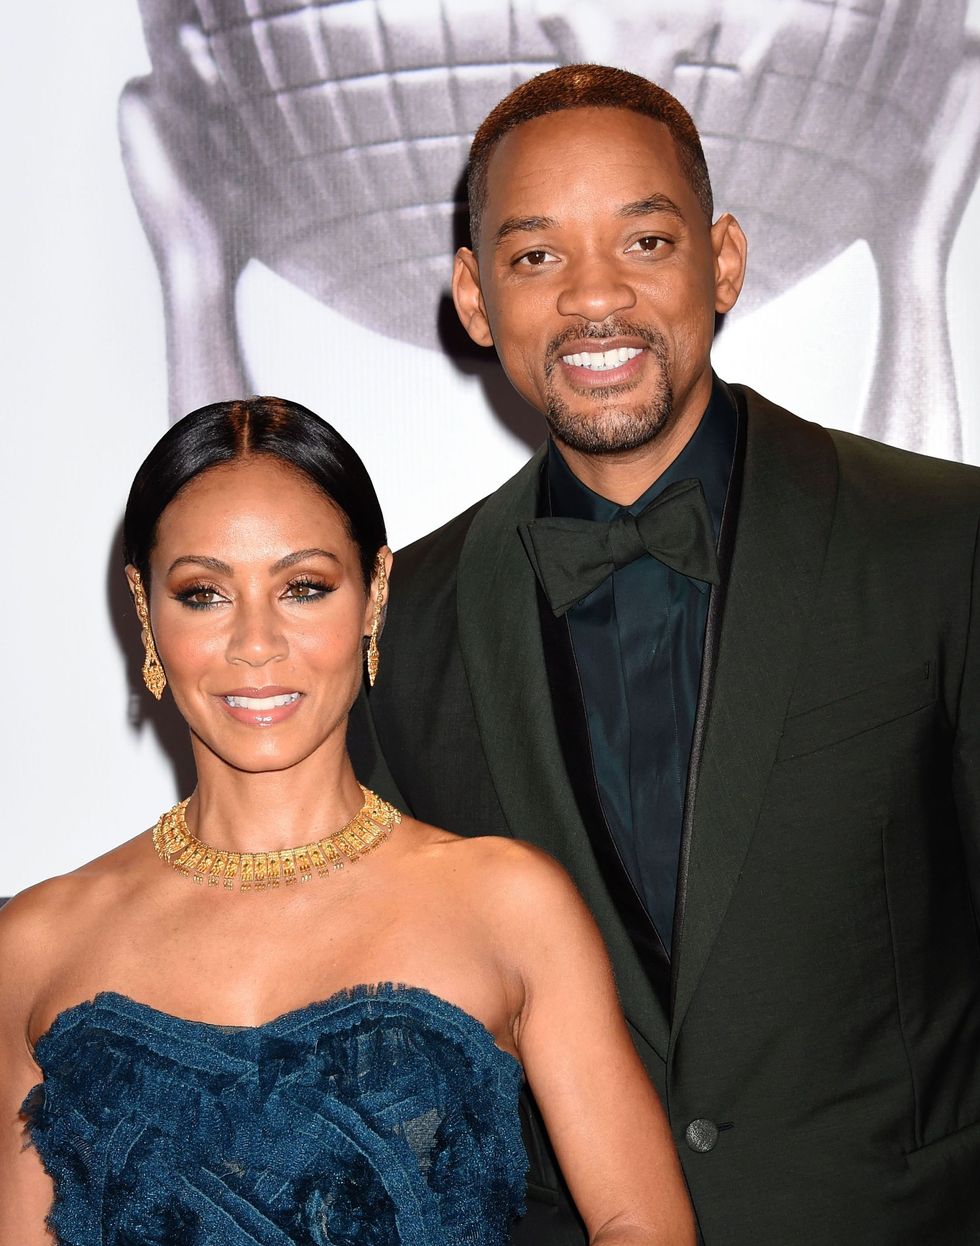 <p>Jada recently revealed the secret behind her 23-year relationship with Will Smith (and no, <a href="http://www.cosmopolitan.com/uk/entertainment/a10339946/jada-pinkett-smith-rumours-will-smith-swingers/" target="_blank">it is most definitely <em data-redactor-tag="em">not</em> swinging</a>). </p><p>"I really think that Will and I have amazing chemistry on a lot of different levels together," the actress told Andy Cohen's <em data-redactor-tag="em">Watch What Happens Live</em>. </p><p>"We love to laugh together, we love to lean together, and we love each other. We just have a good time together. That's the secret.</p><p>"We just really like each other."<br></p><p>That definitely helps. </p>